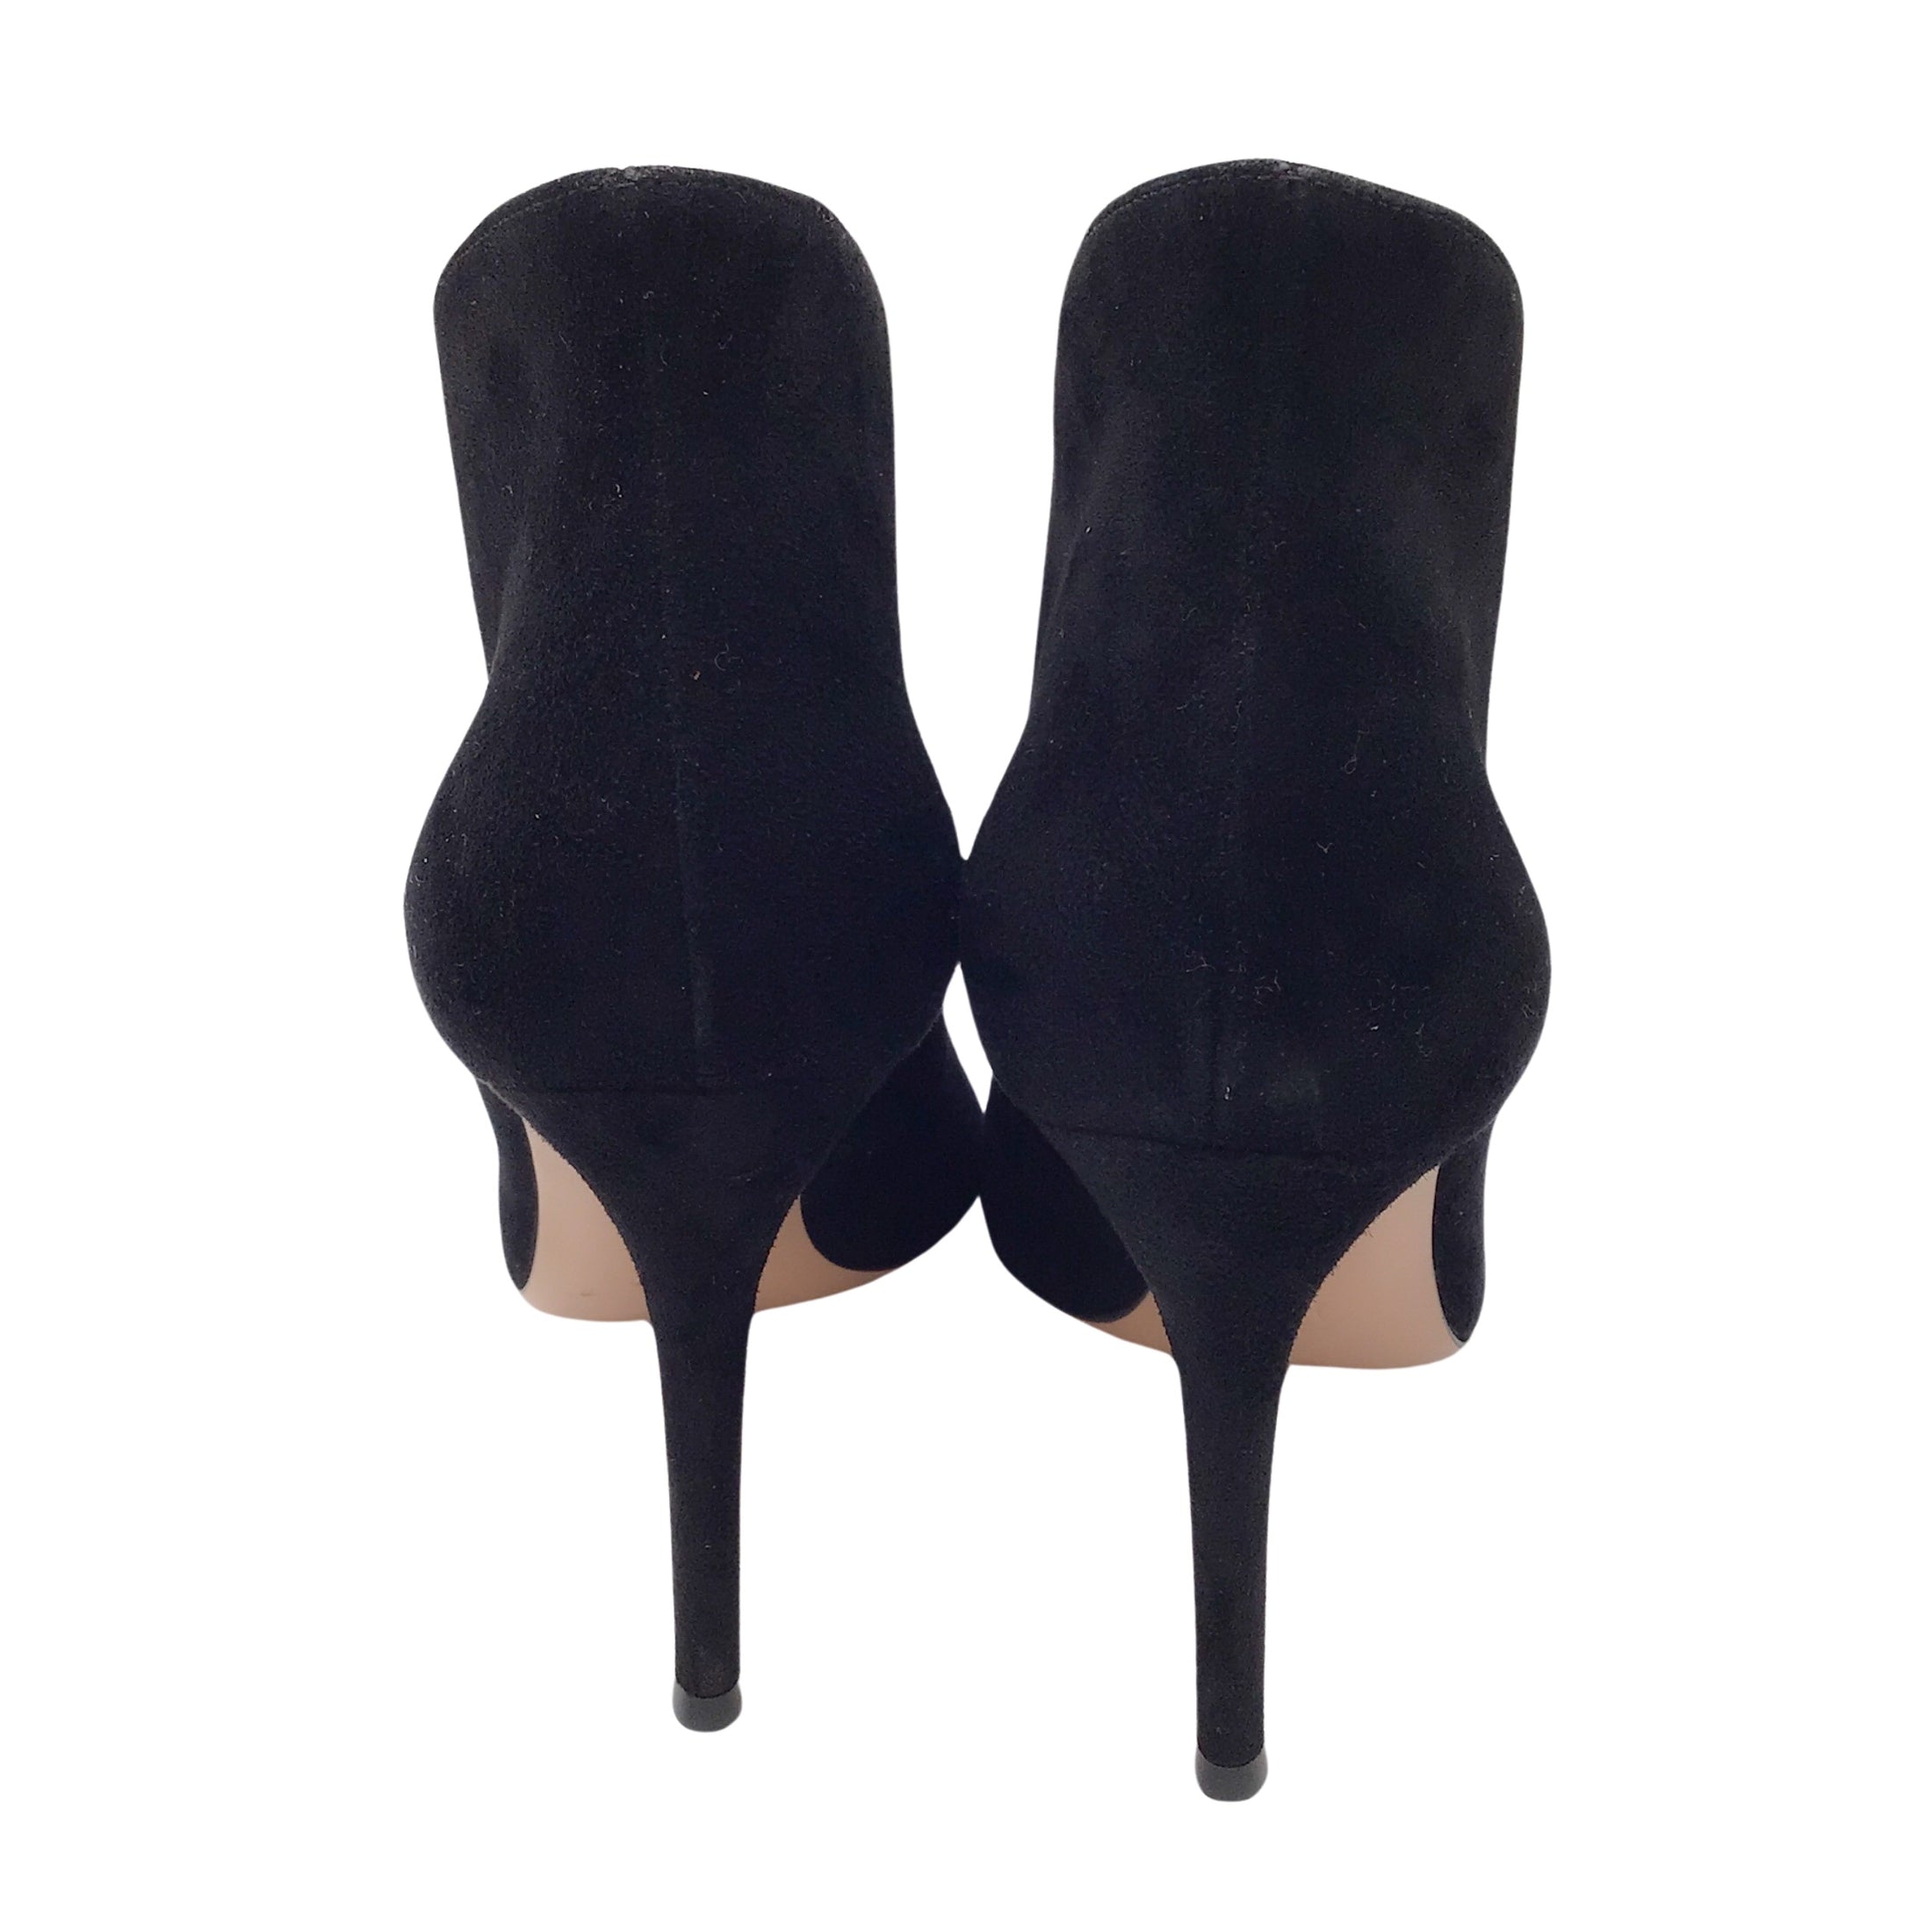 Gianvito Rossi Black Vamp Suede Leather Peep Toe Ankle Boots / Booties